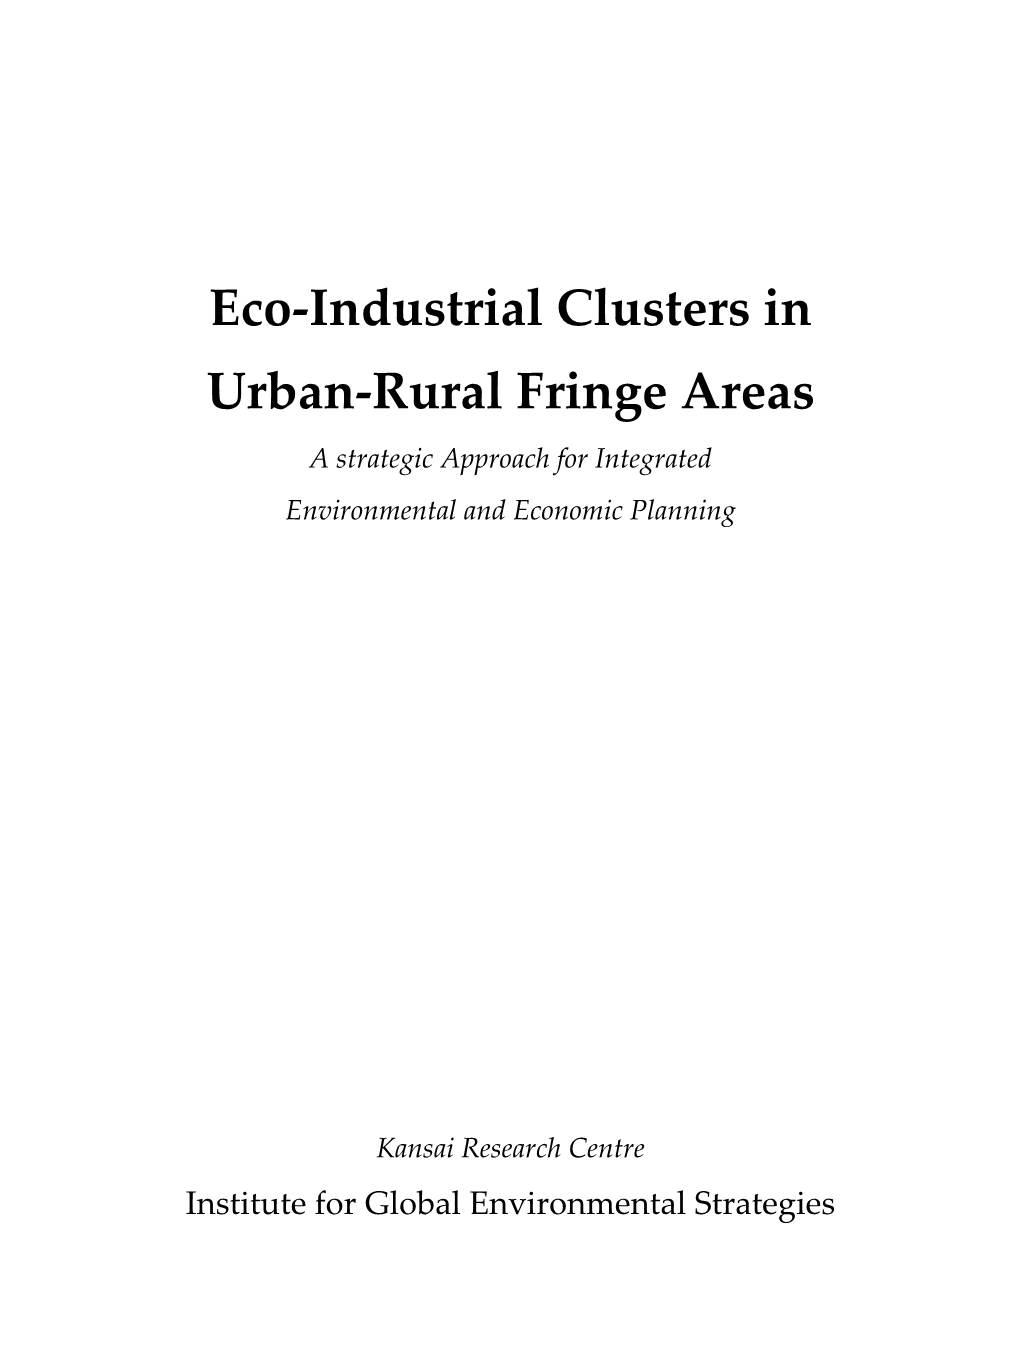 Eco-Industrial Clusters in Urban-Rural Fringe Areas a Strategic Approach for Integrated Environmental and Economic Planning